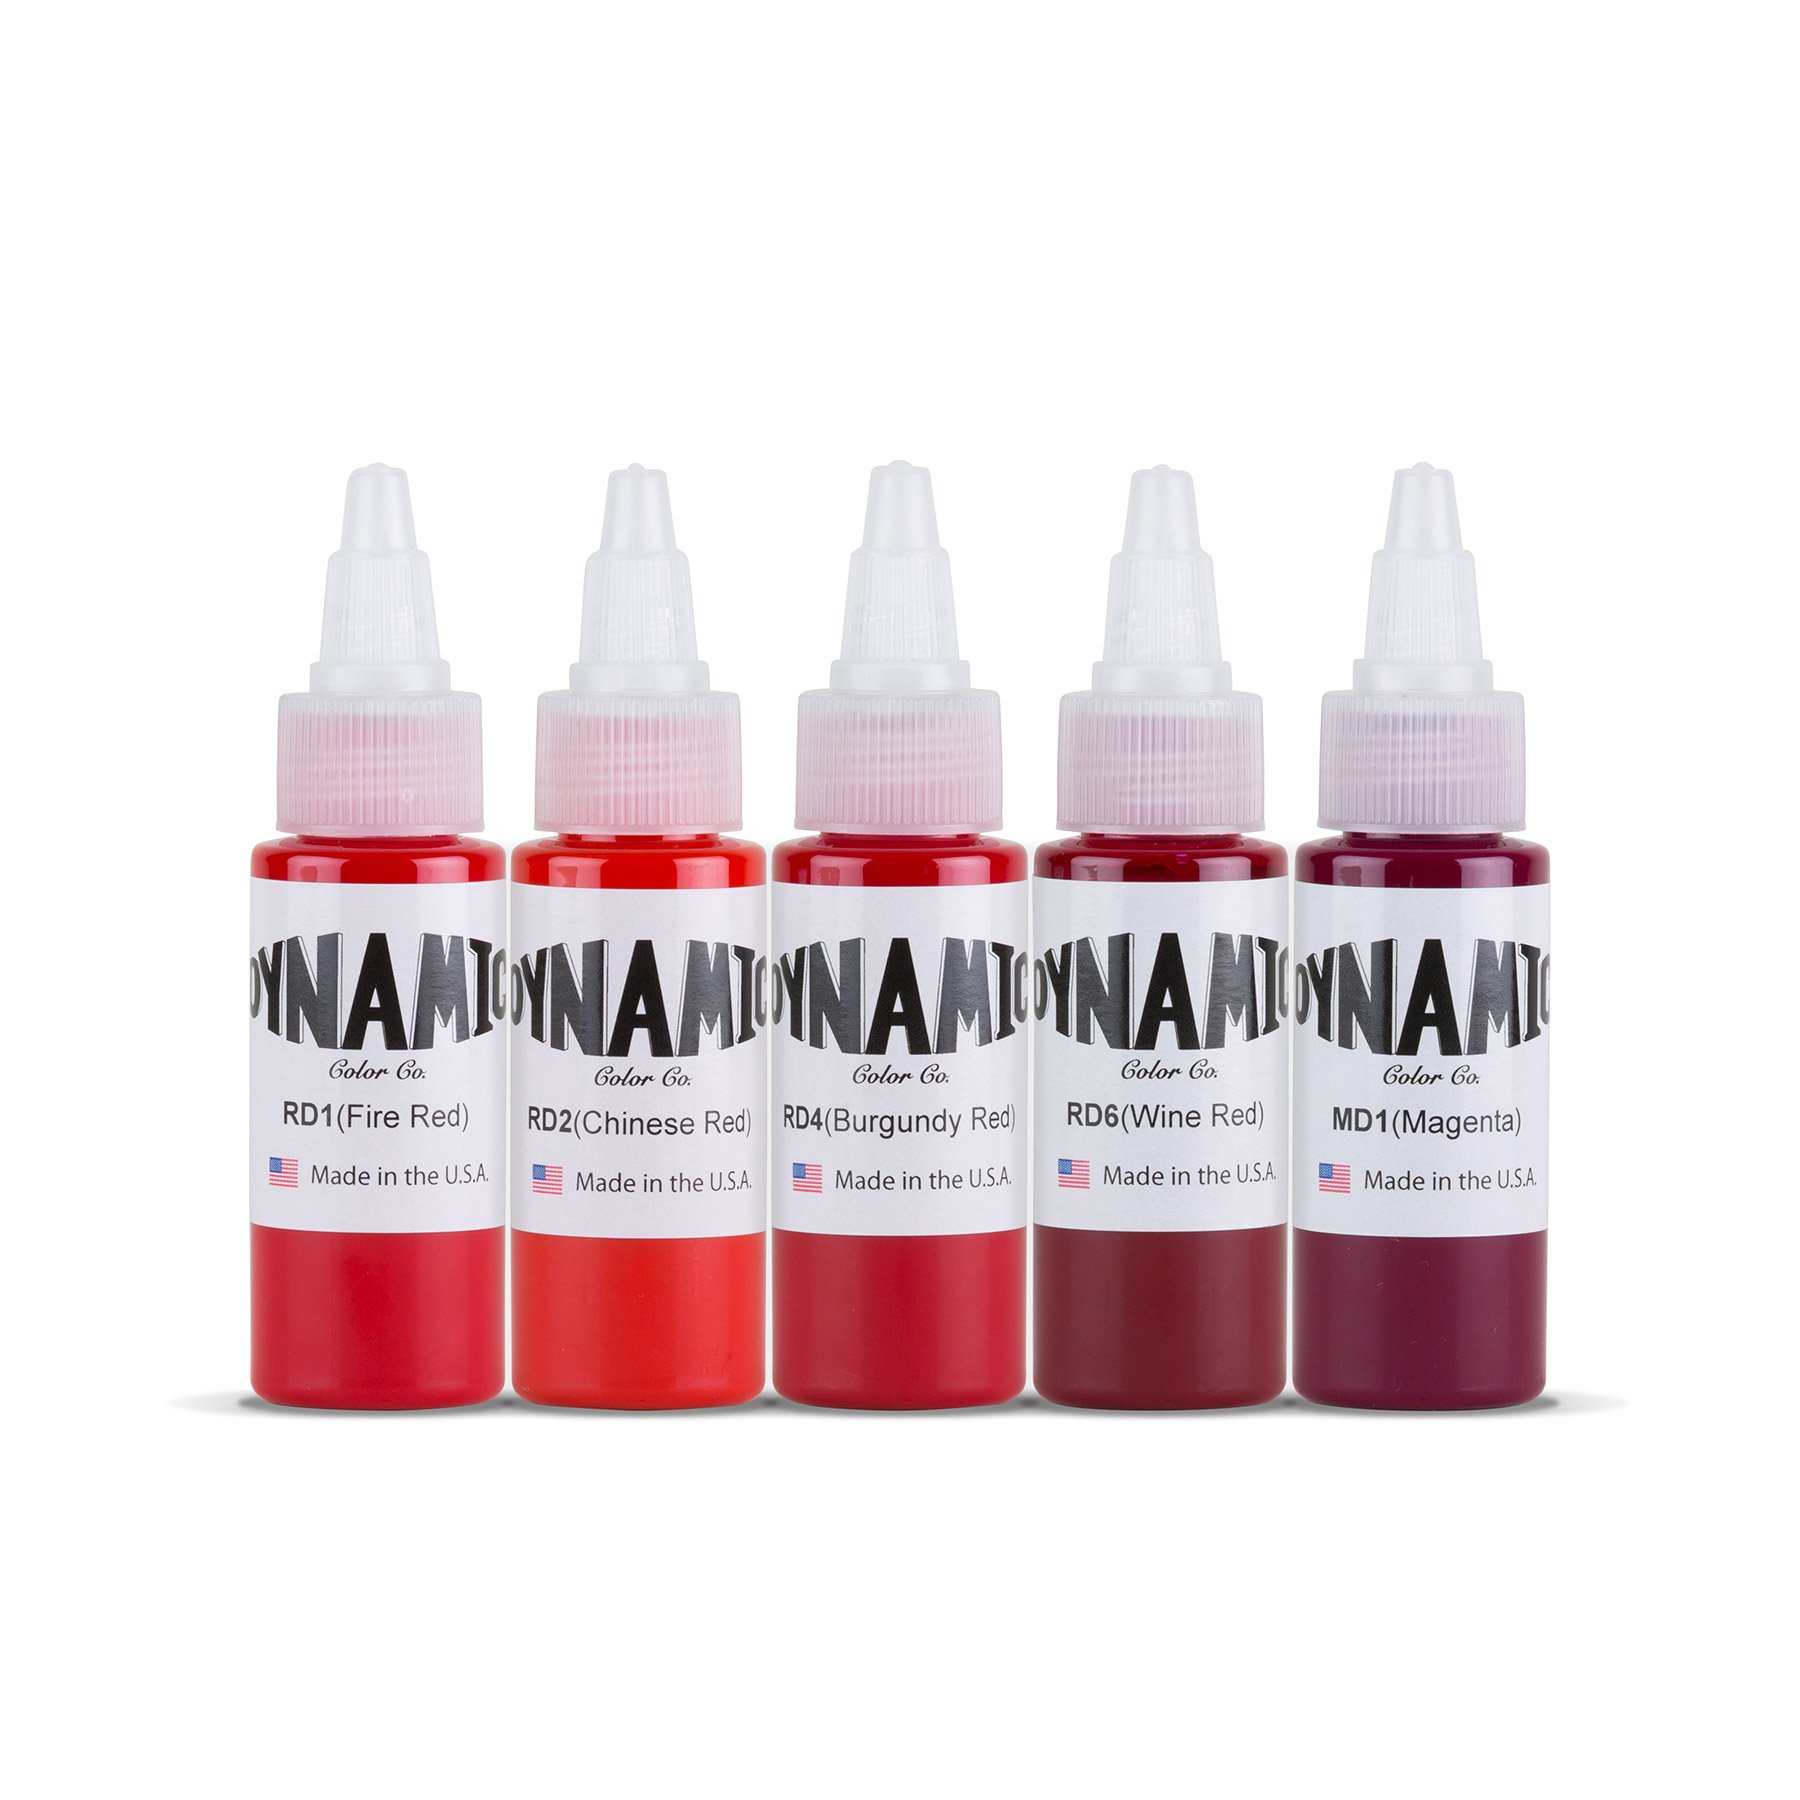  Dynamic Color Co - OG Color Ink Set, 12 Bottles (1 oz Each)  Includes: (Burgundy Red, Chinese Red, Fire Red, Green, Blue, Orange, White,  Canary Yellow, Brown, Magenta, Violet, and Black) 